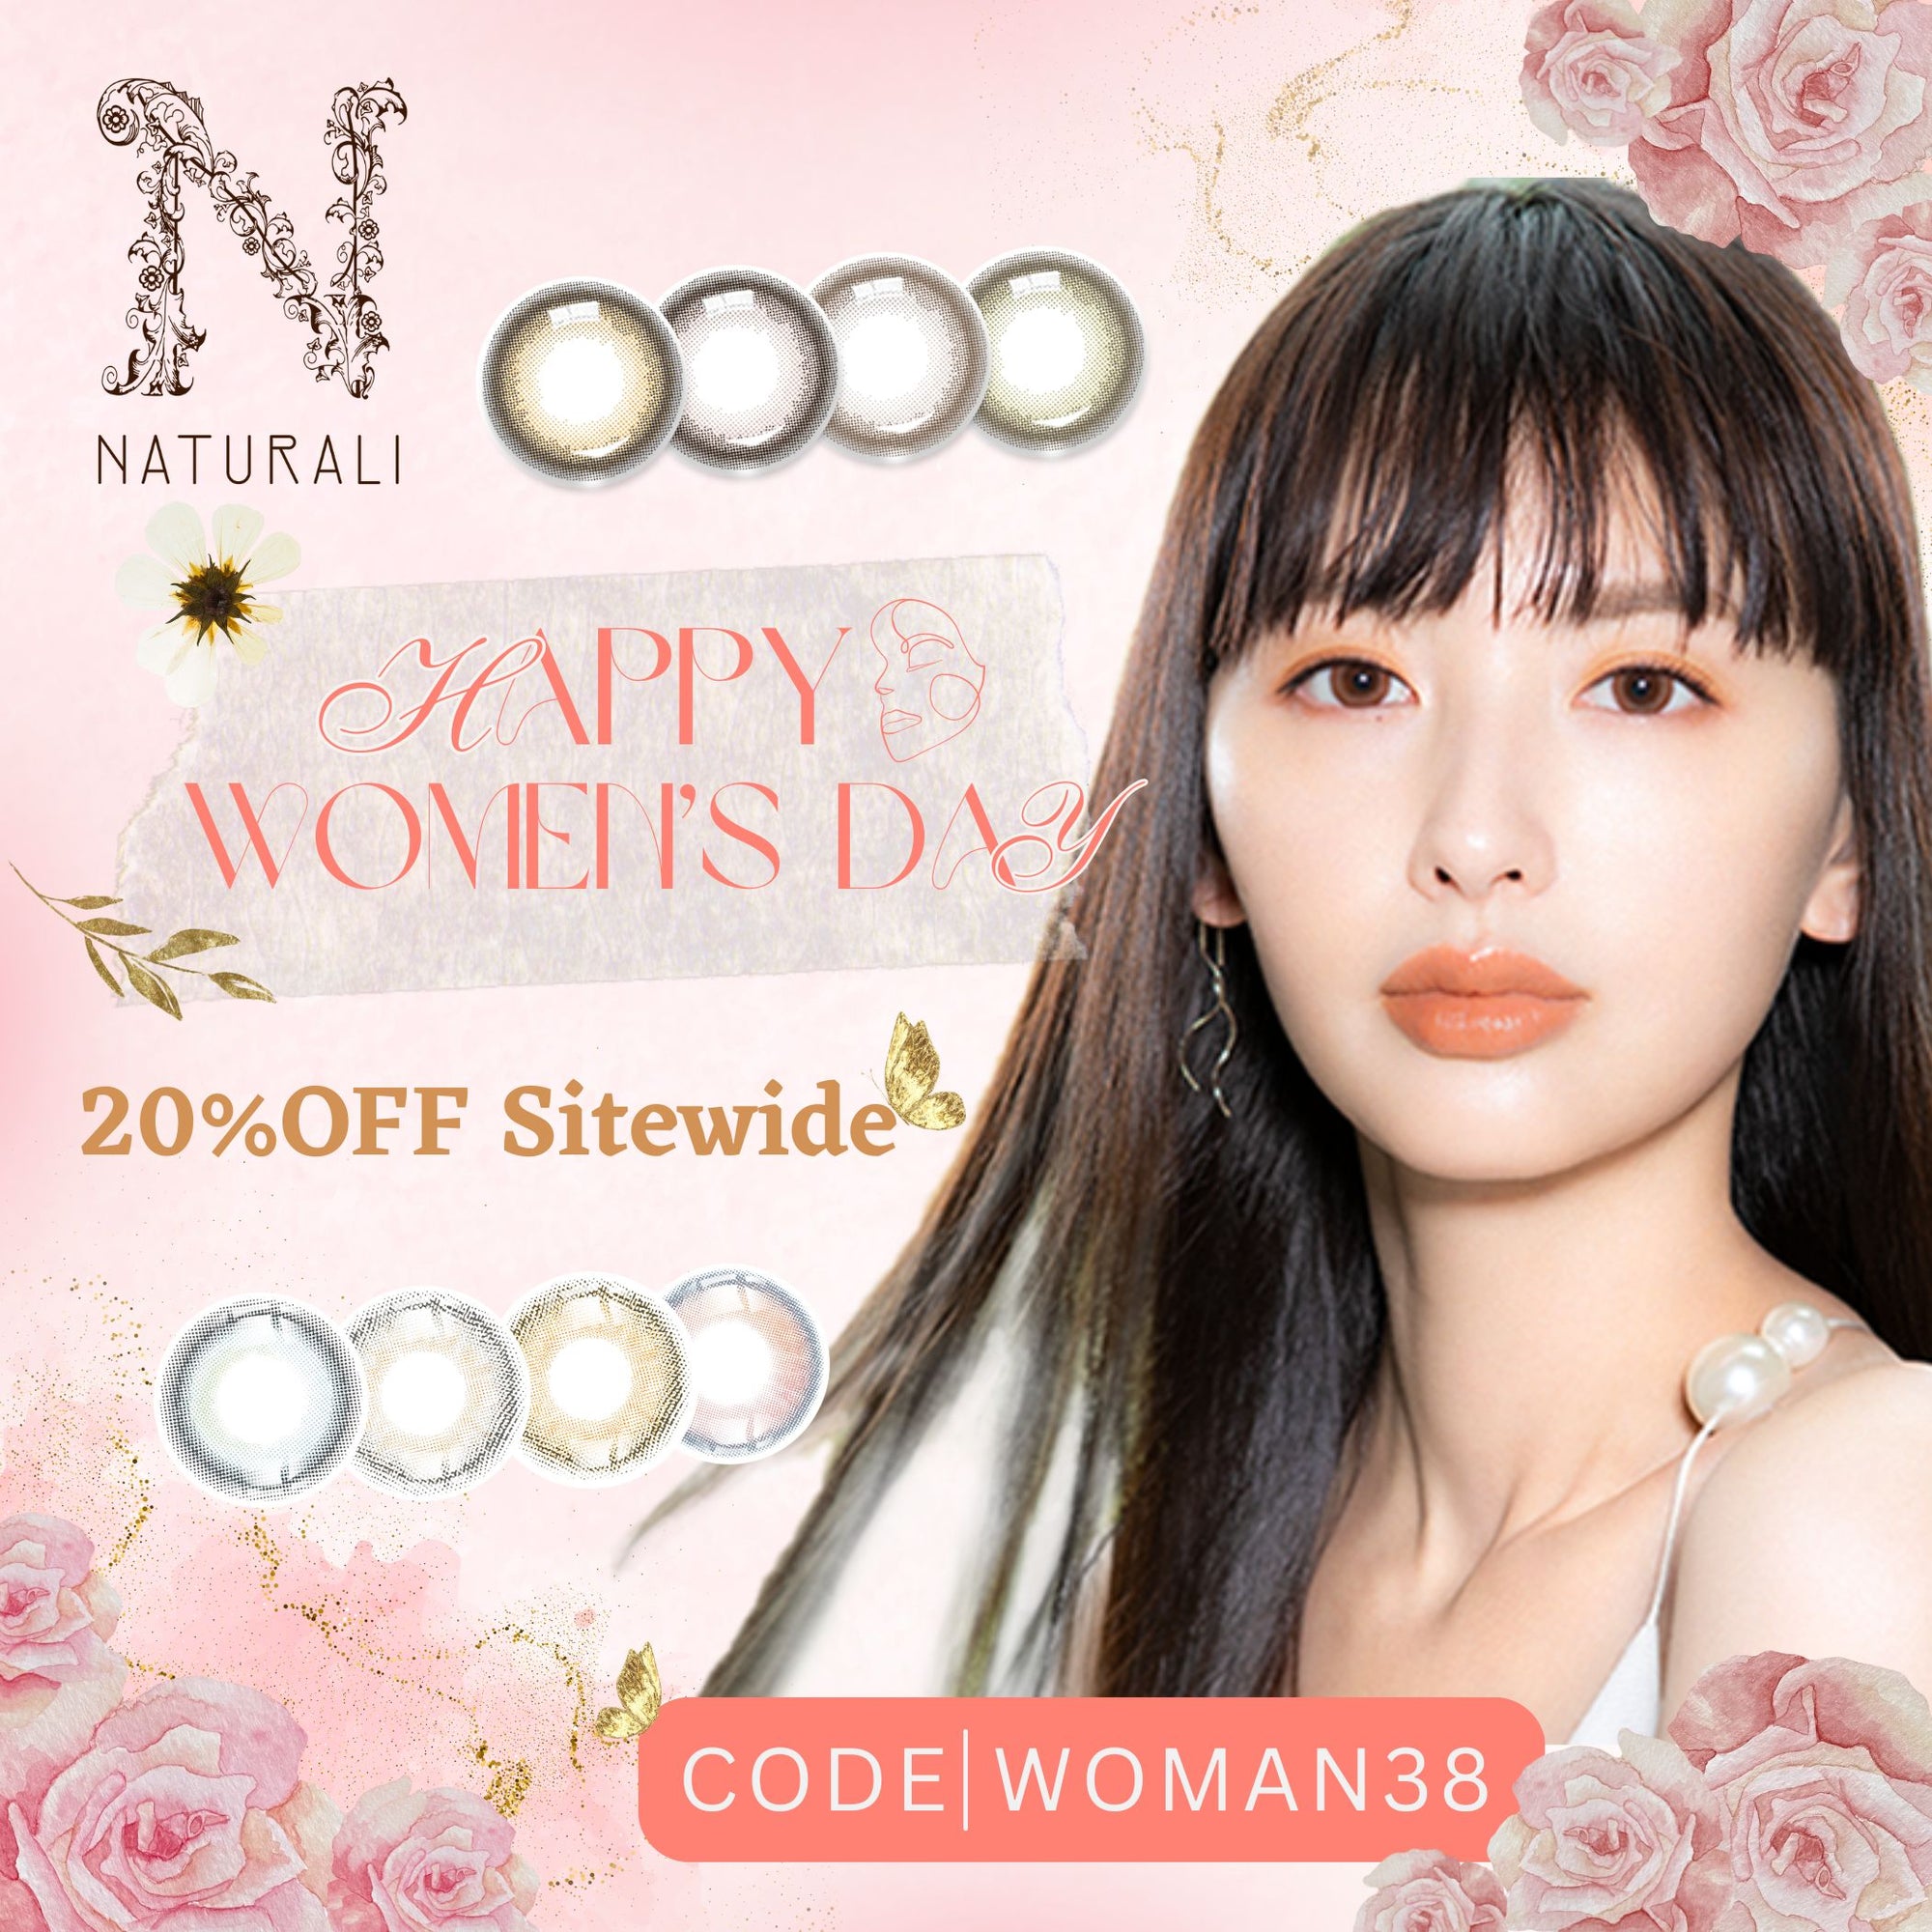 Women's Day 20% OFF SITEWIDE🌸